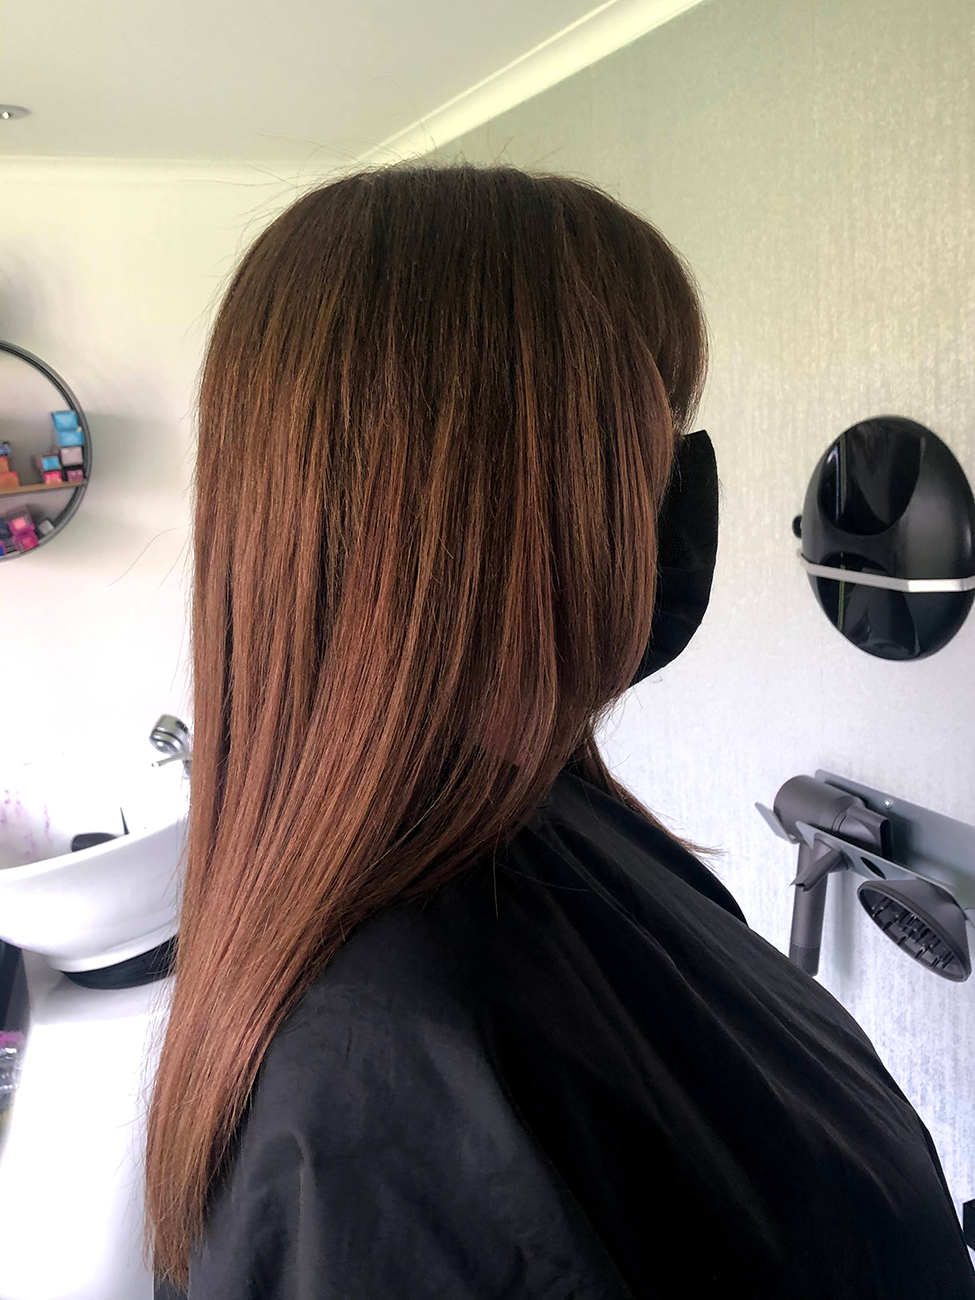 Nano Hair Extensions - Kays Hairdressing - Hairdresser in Witham 